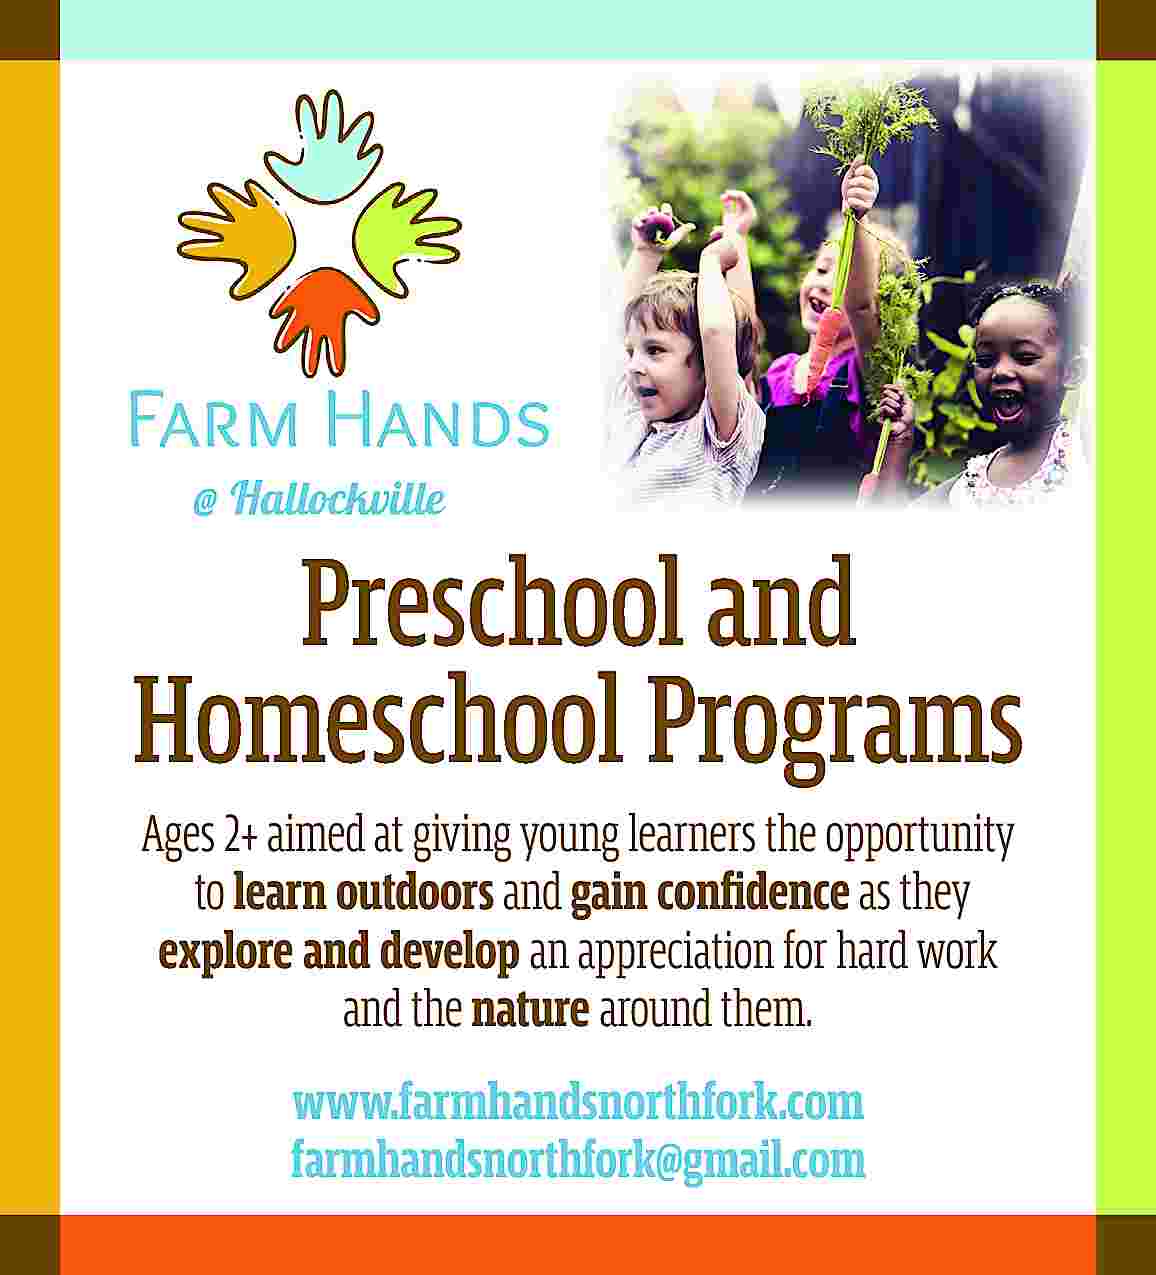 Preschool and <br>Homeschool Programs <br>Ages  Preschool and  Homeschool Programs  Ages 2+ aimed at giving young learners the opportunity  to learn outdoors and gain confidence as they  explore and develop an appreciation for hard work  and the nature around them.  www.farmhandsnorthfork.com  farmhandsnorthfork@gmail.com     